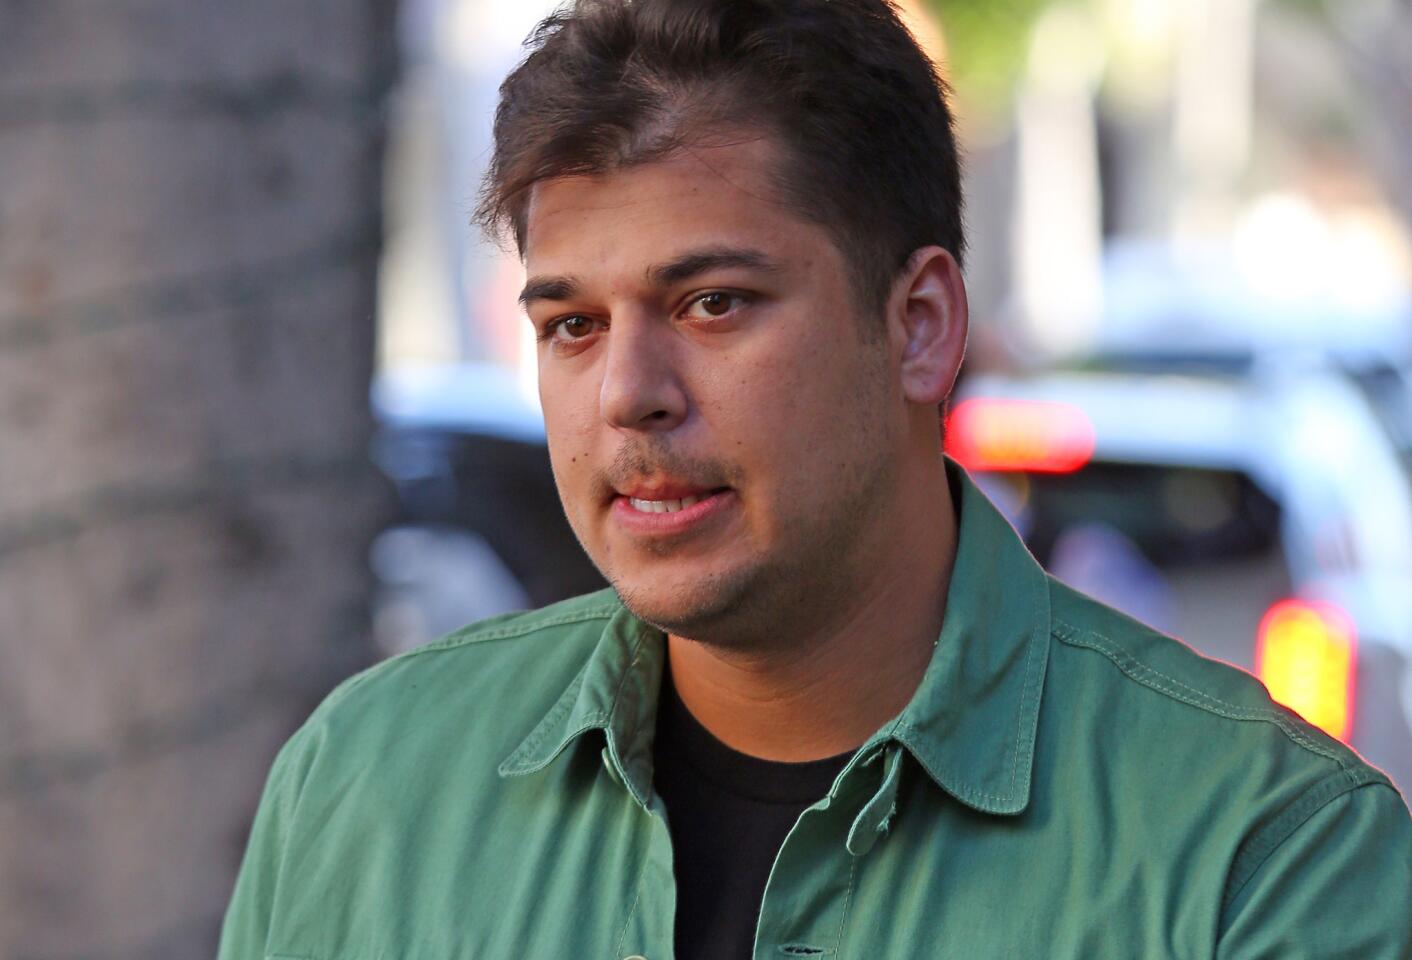 Rob Kardashian fires back at haters on Twitter